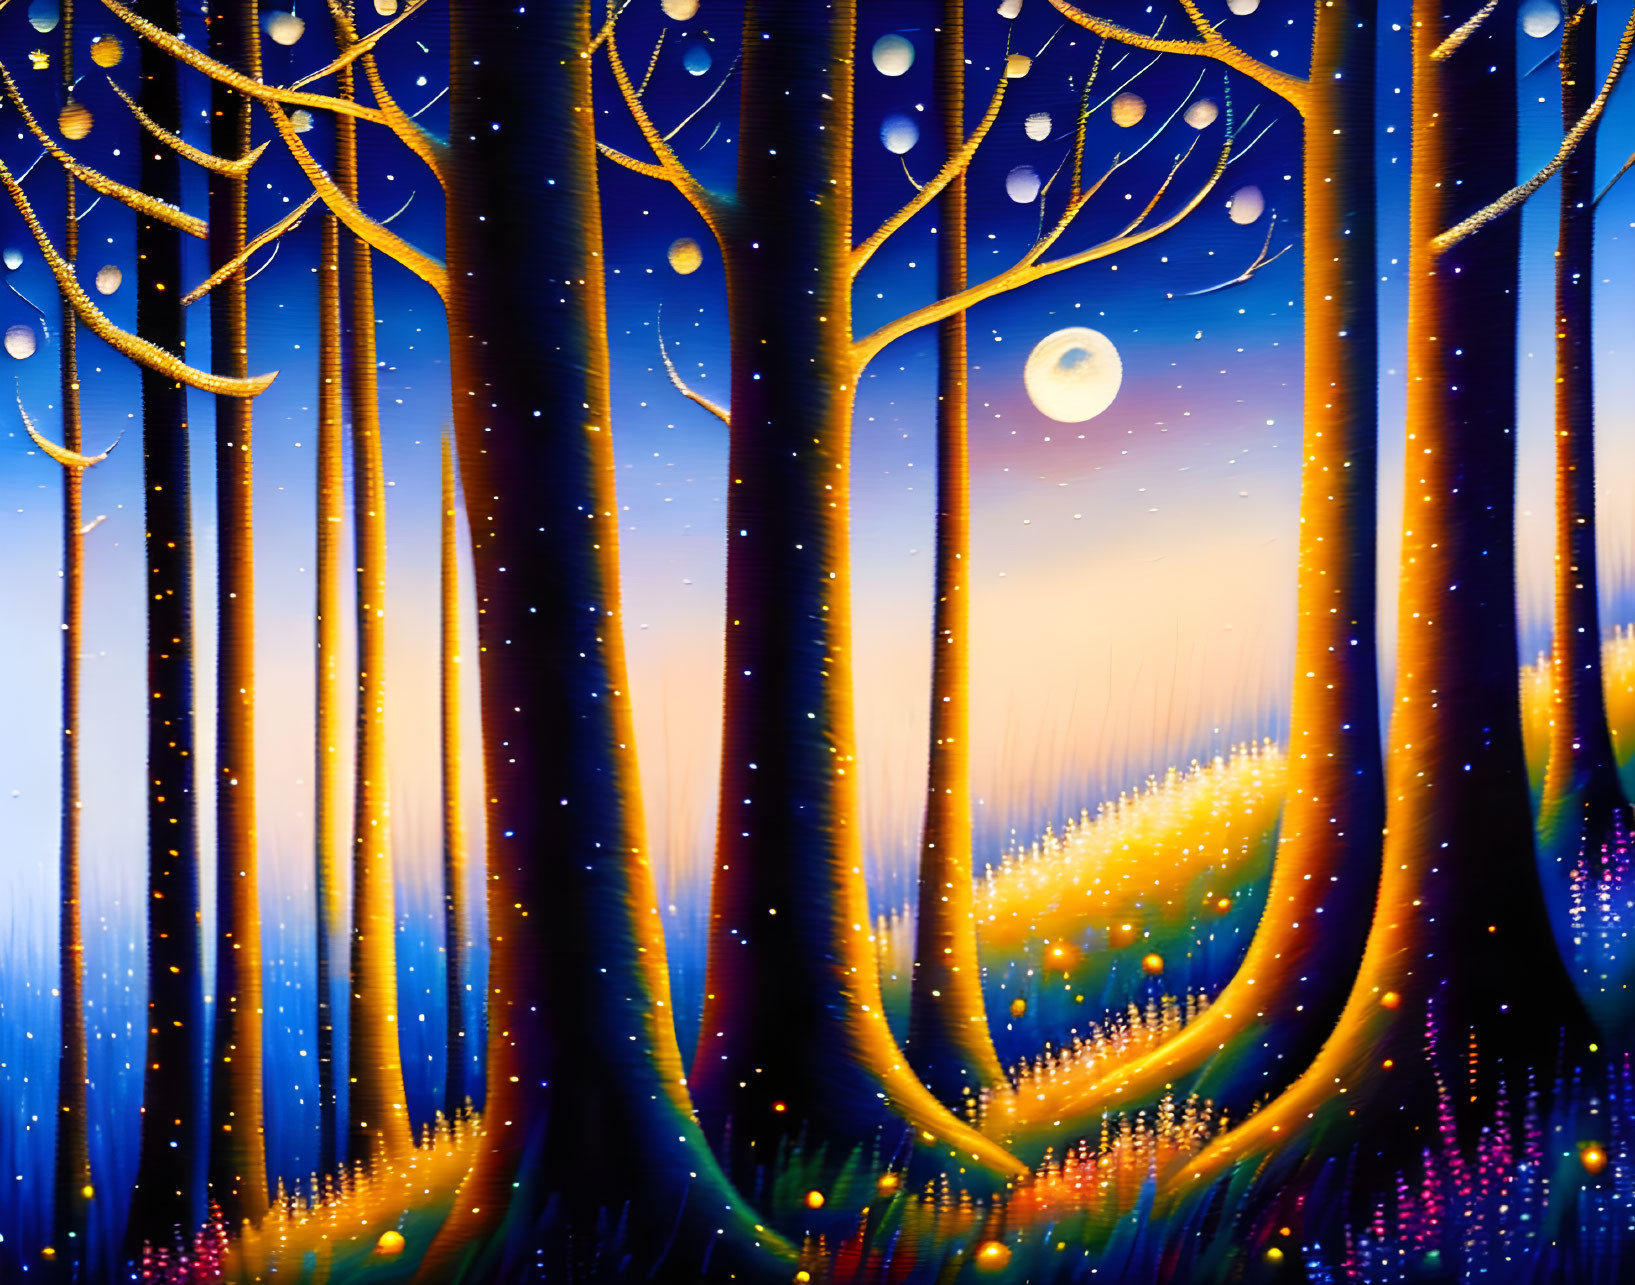 Vibrant painting: Magical forest at night with glowing trees, clear moon, luminous grass,